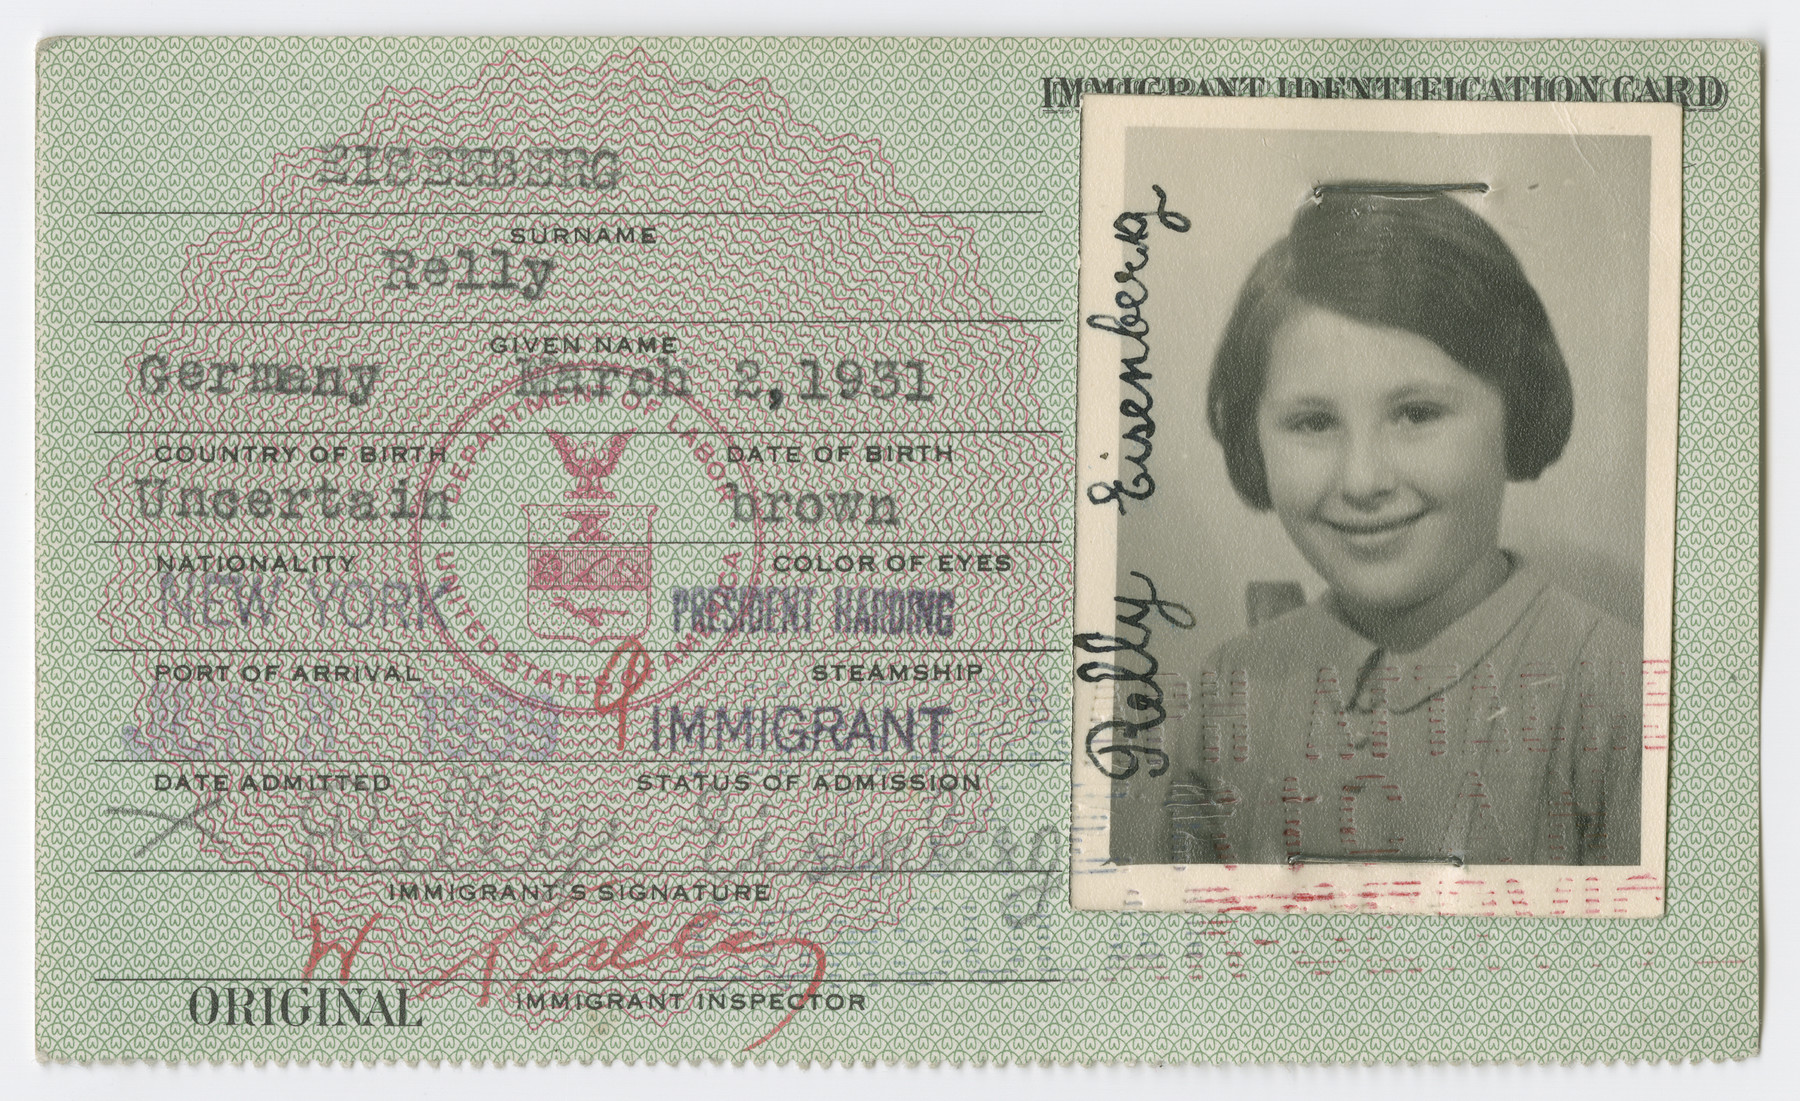 United States Immigrant Identification Card issued to Relly Eisenberg.

It states she was born in Germany though she was born in Vienna.